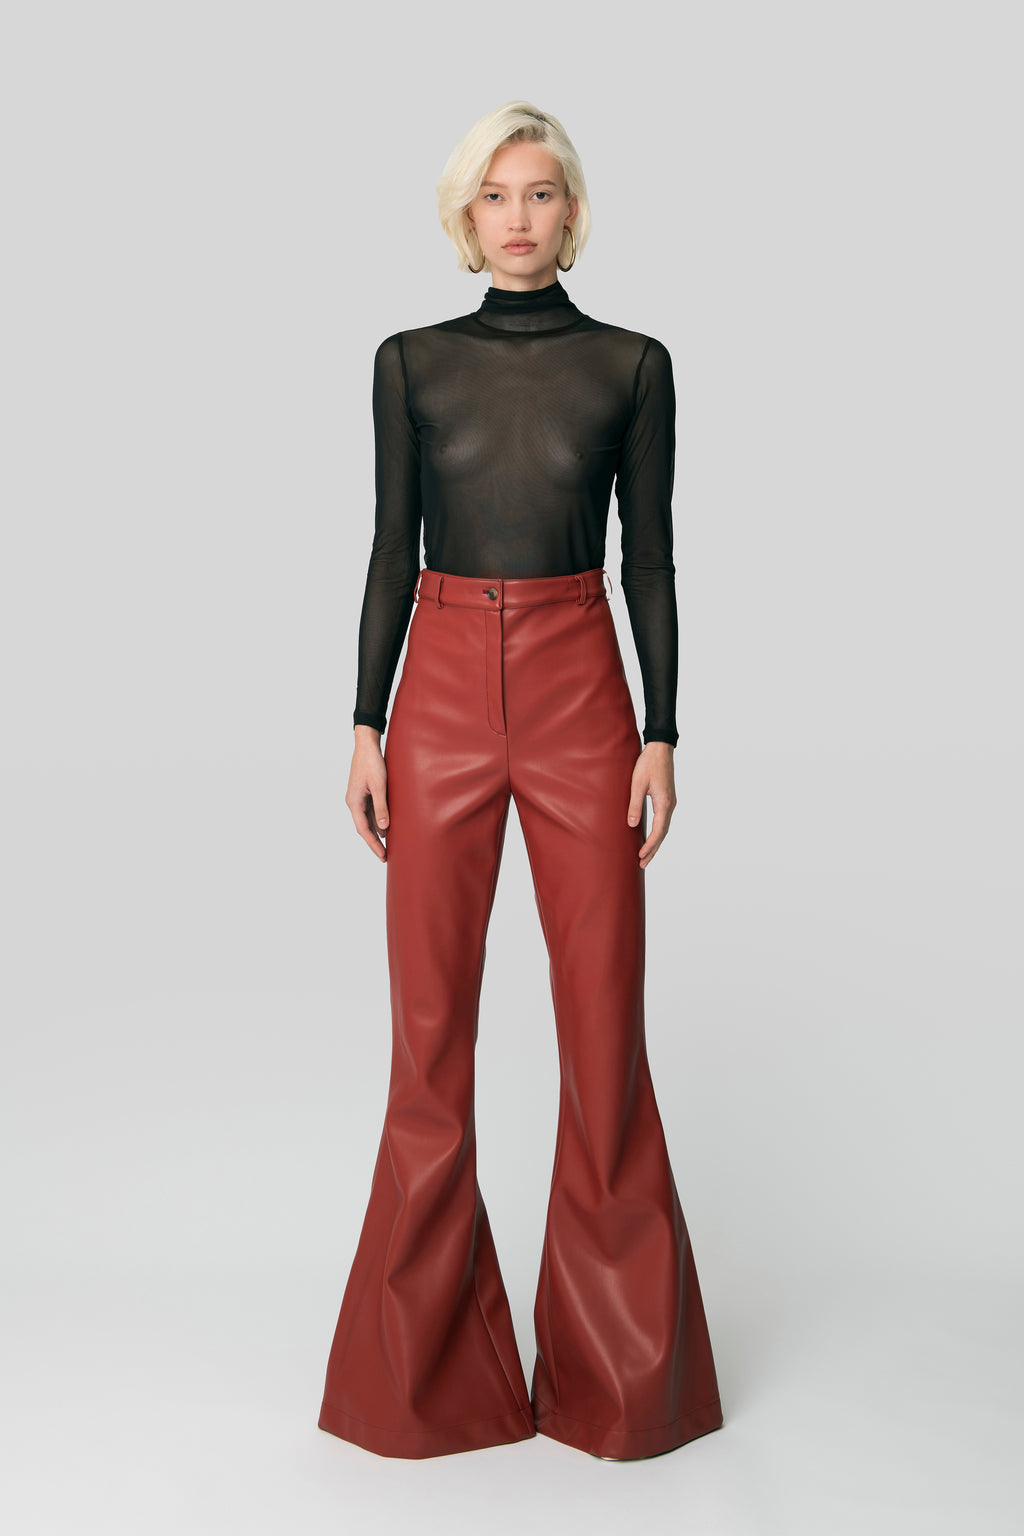 The Brick Red Leather Bianca Pants